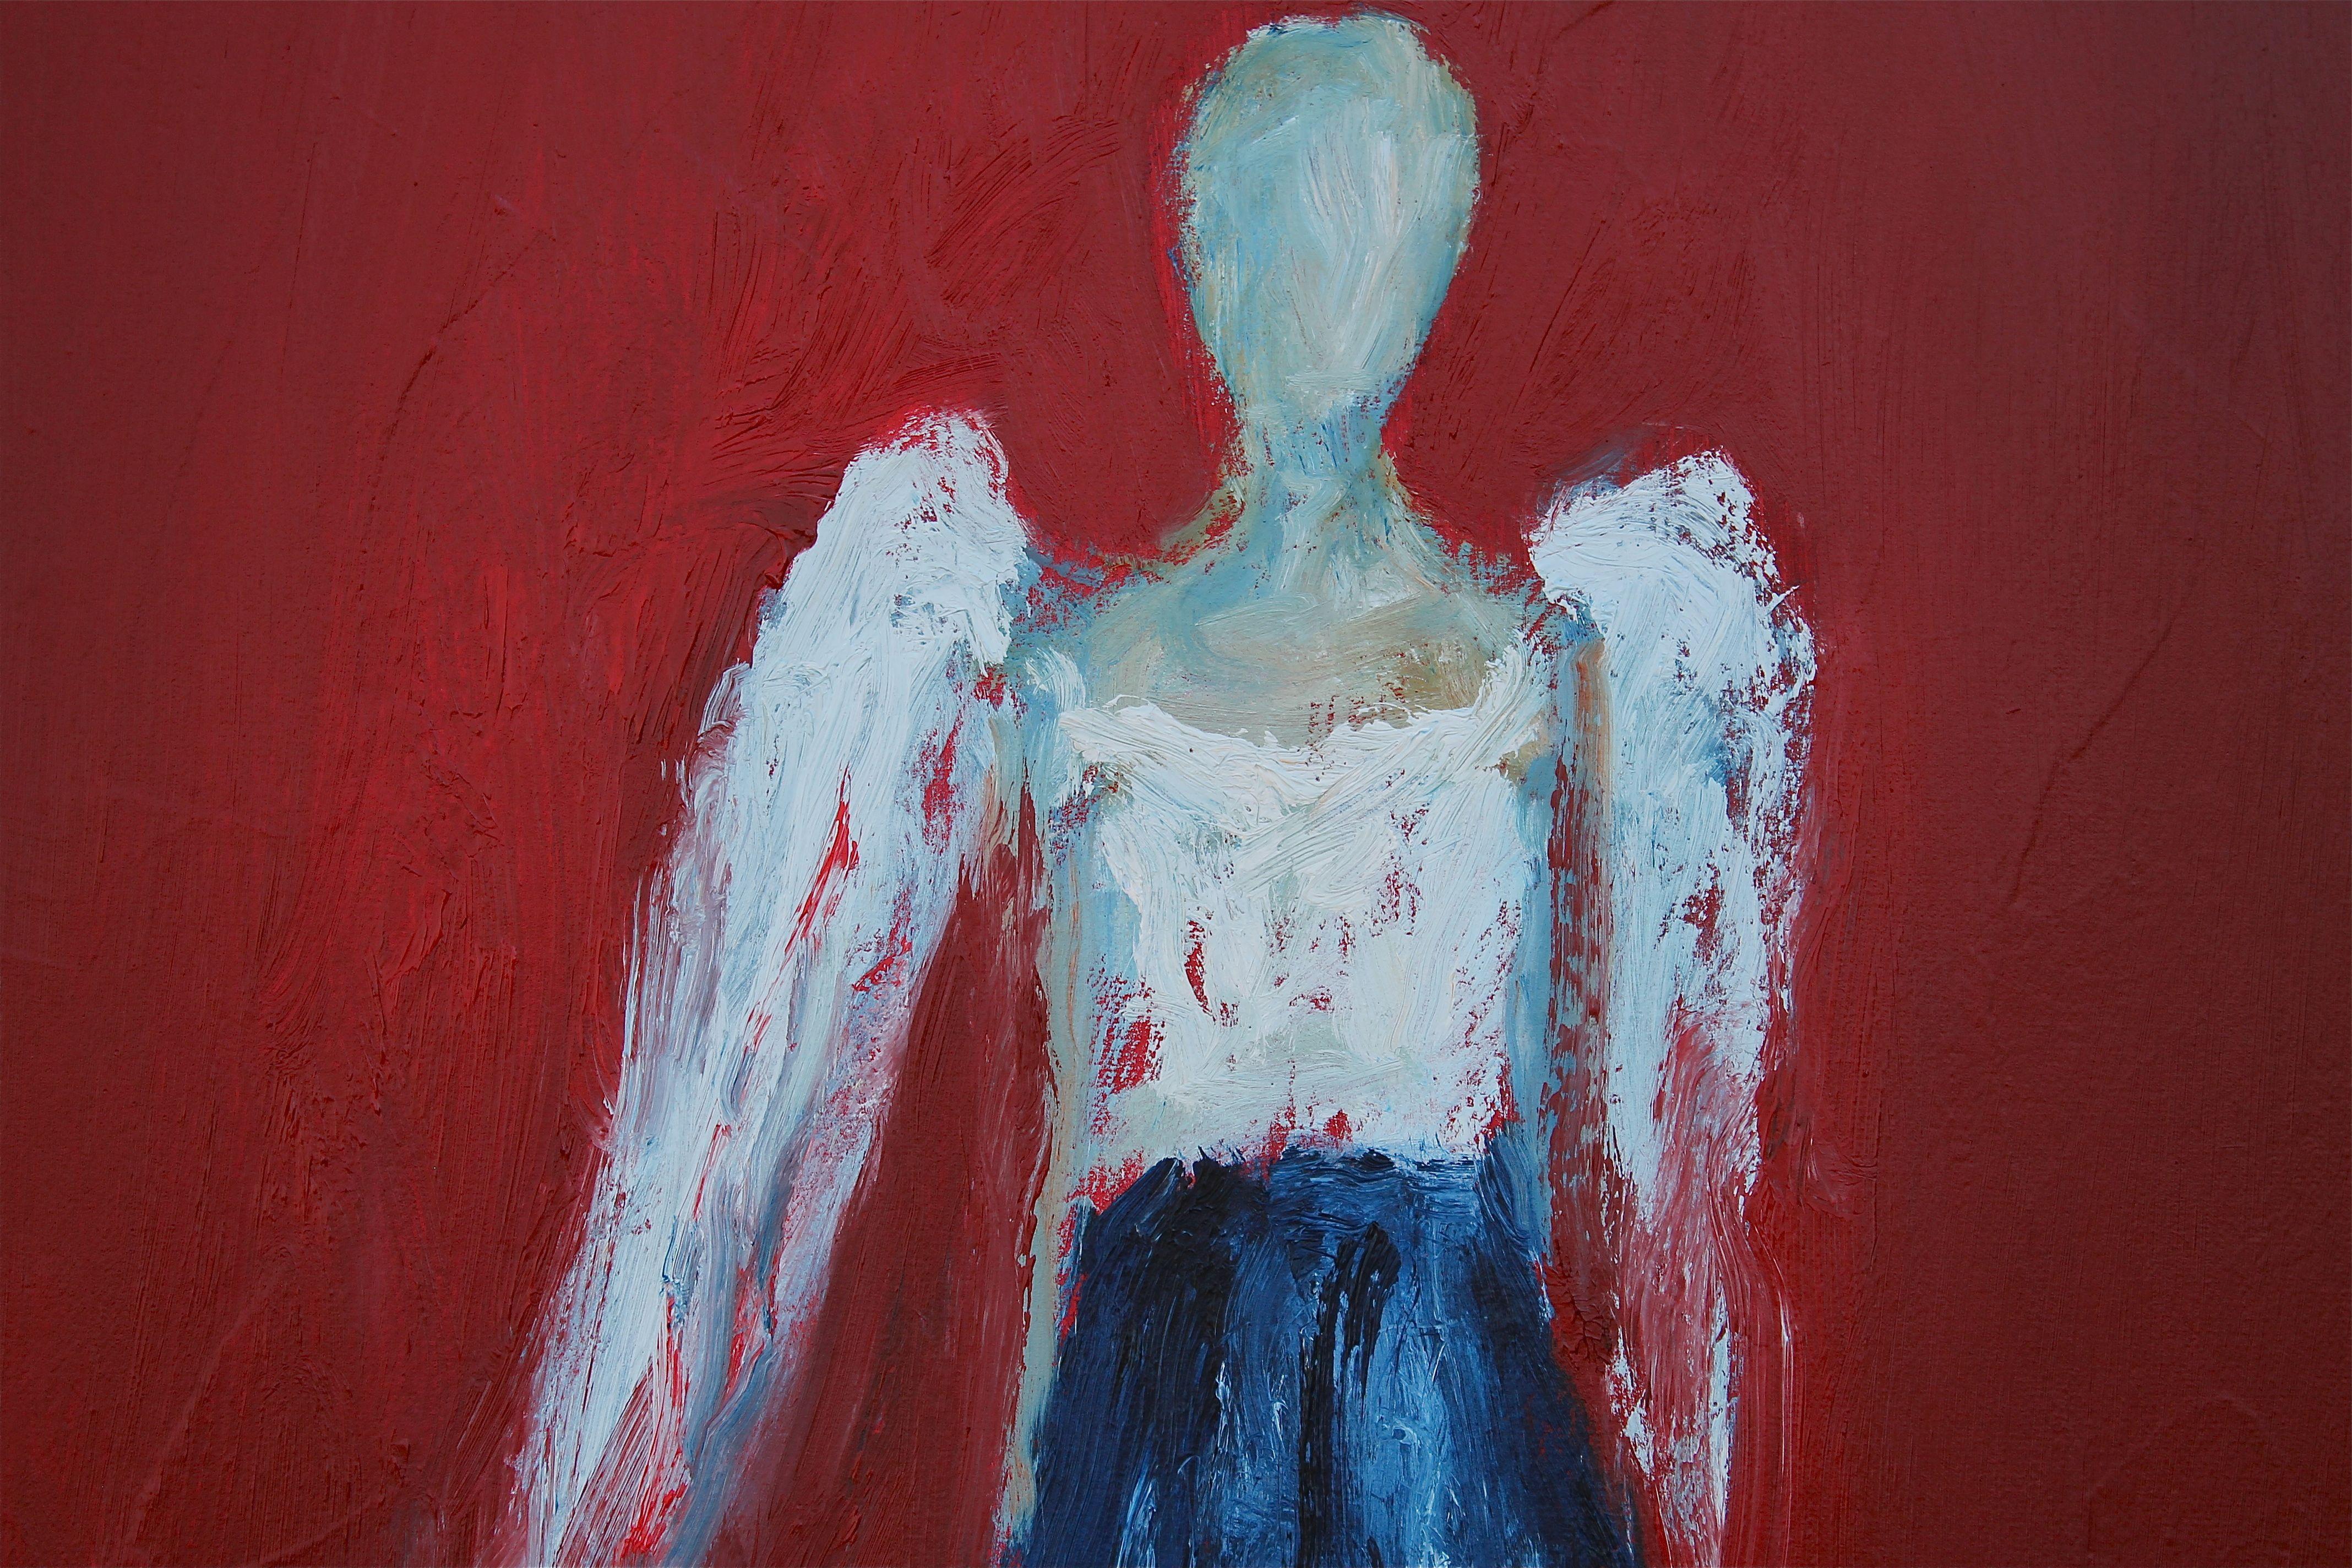 Who Are These Angels CXXXVIII, Painting, Oil on Canvas 1